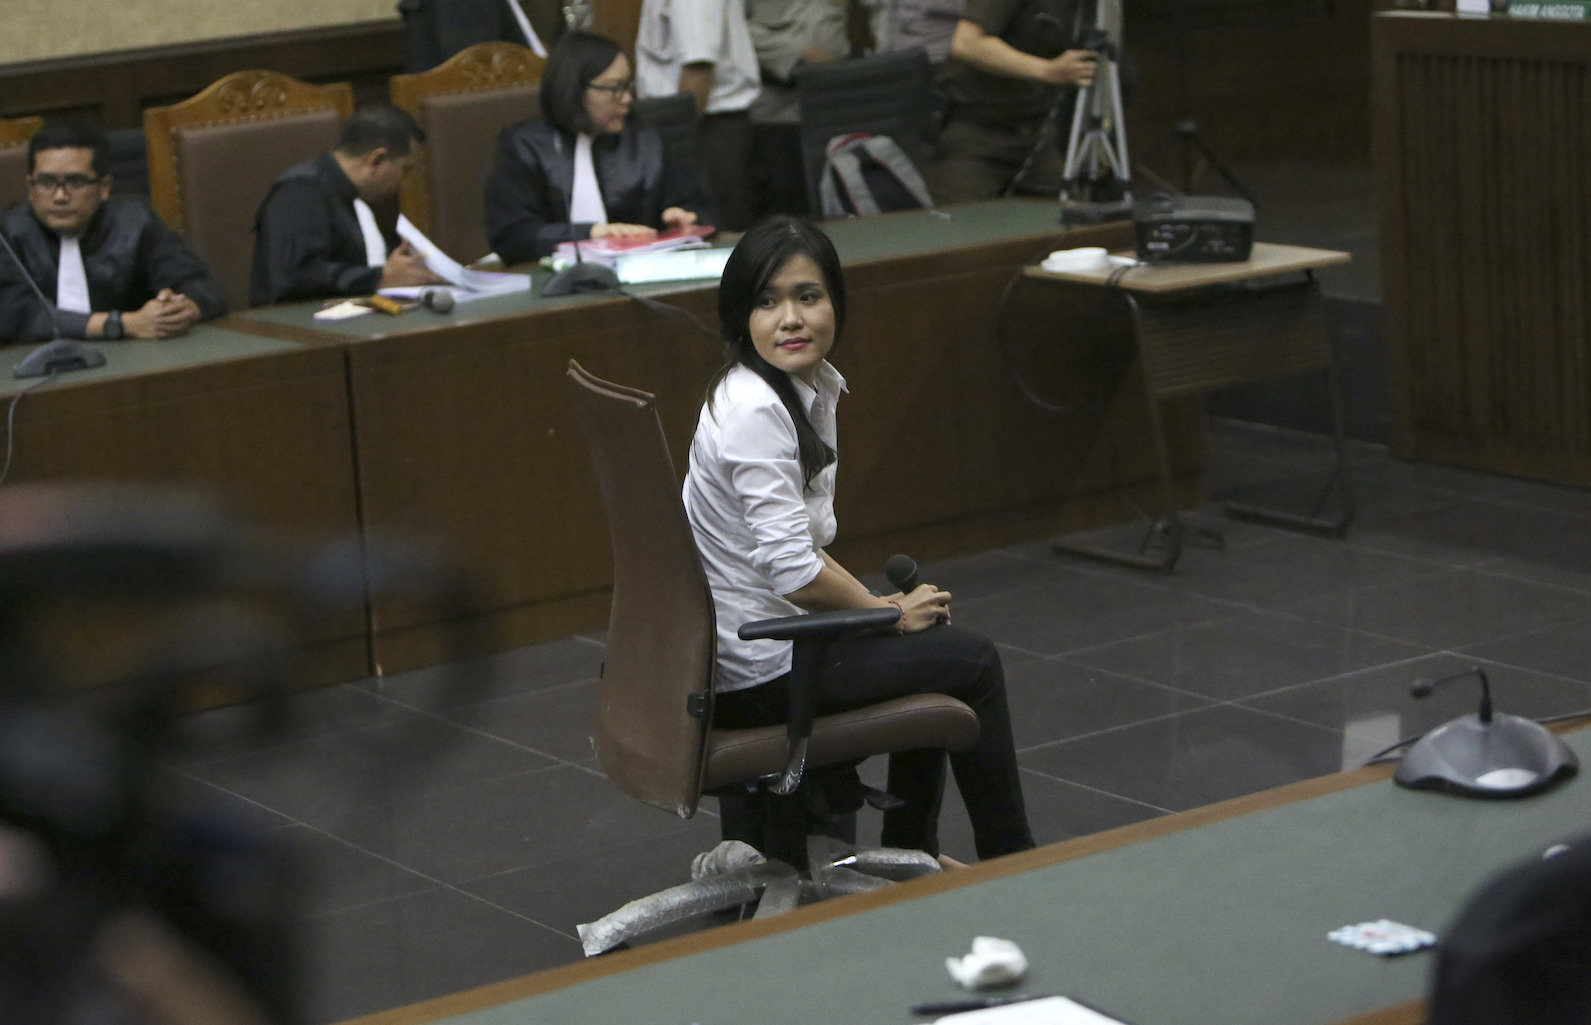 Ice Cold: Murder, Coffee and Jessica Wongso (2023)